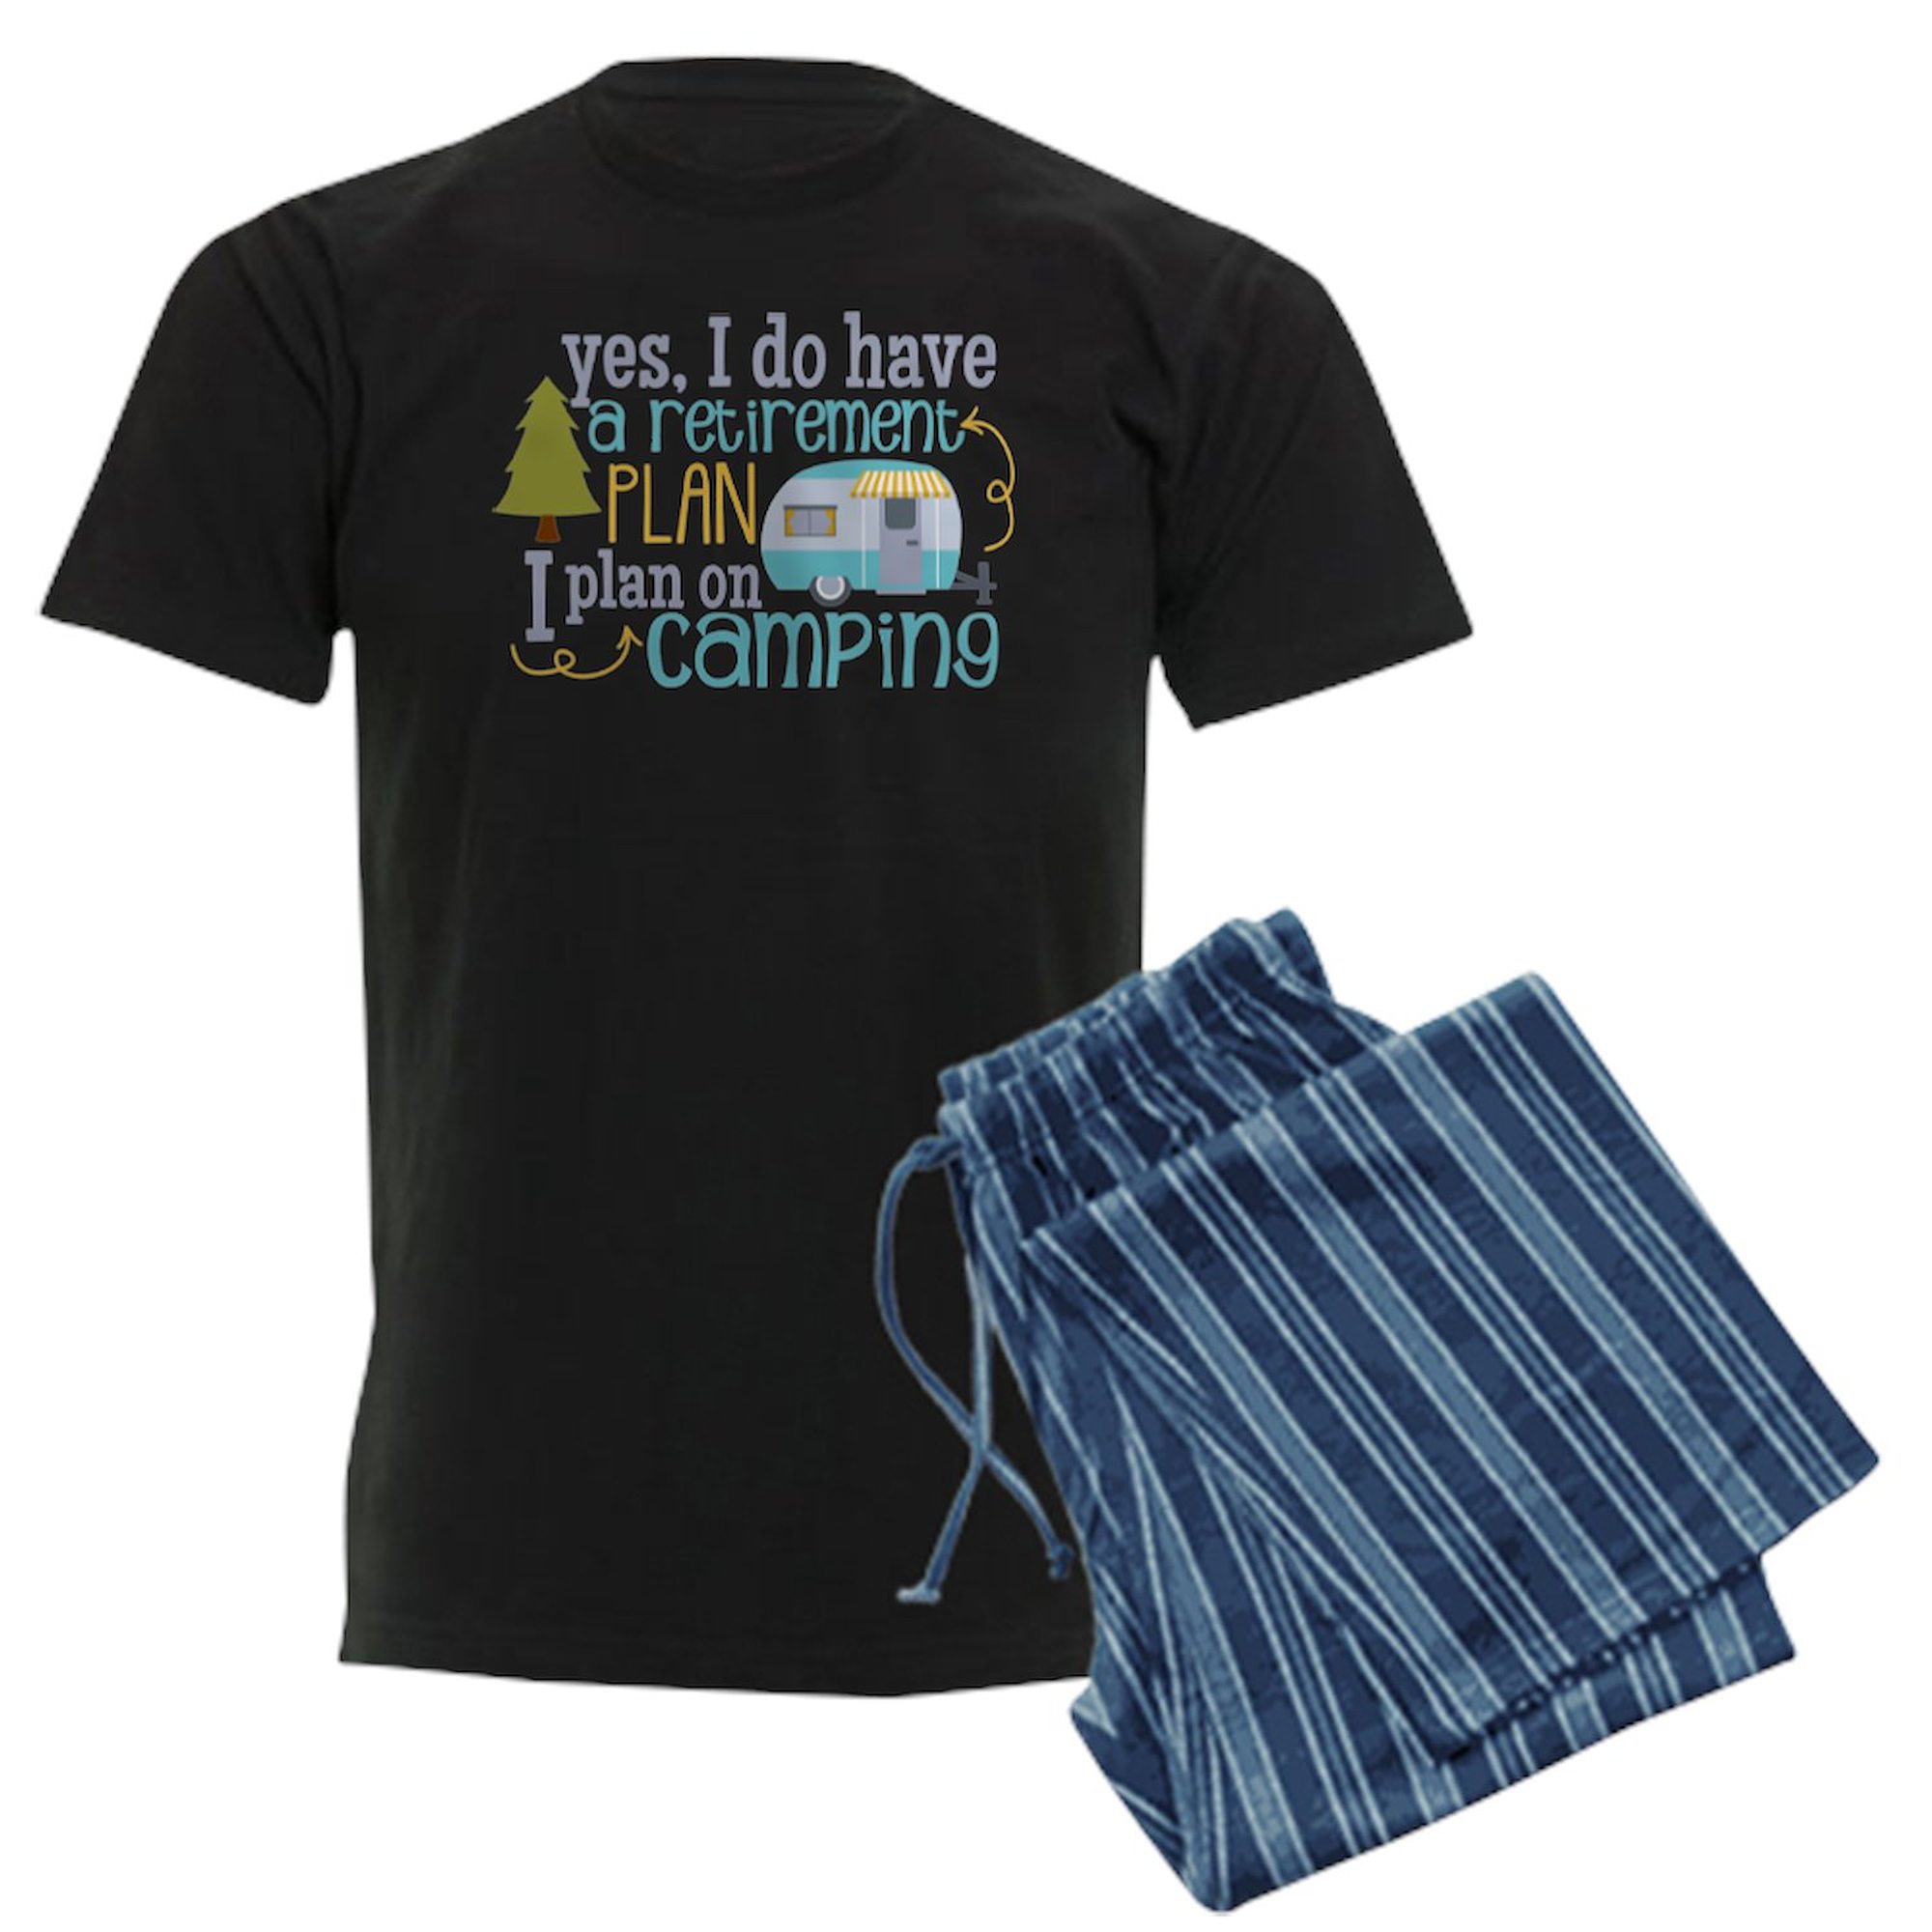 CafePress - Yes, I Do Have A Retirement Plan I Plan On Camping - Men's Dark Loose Fit Cotton Pajama Set - image 1 of 4